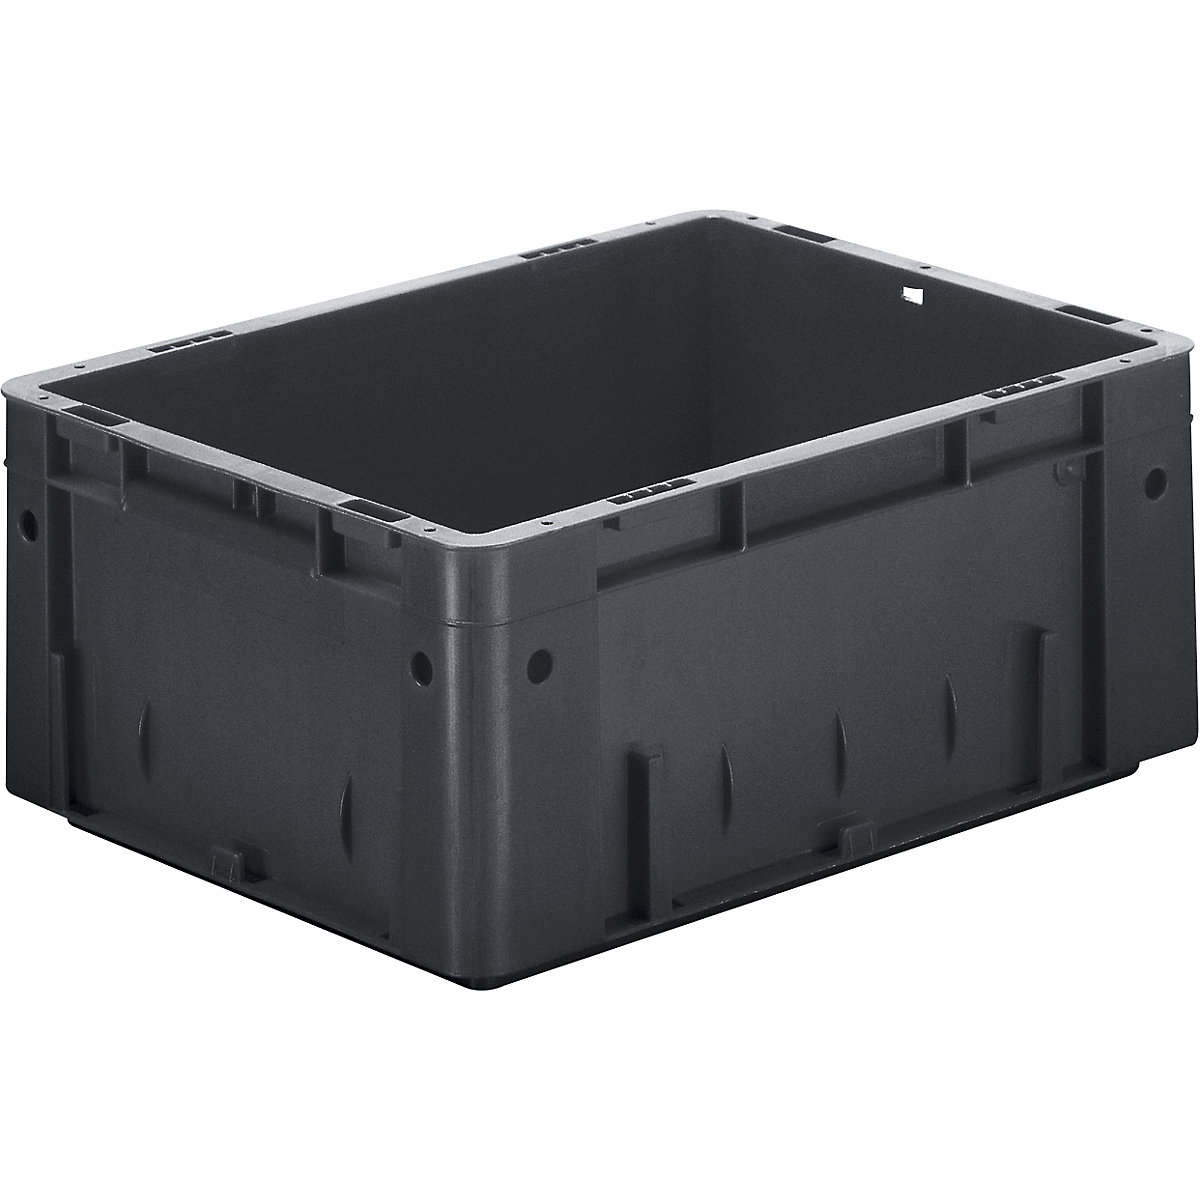 ESD heavy duty EURO-size container, made of polypropylene, LxWxH 400 x 300 x 175 mm, pack of 4-2